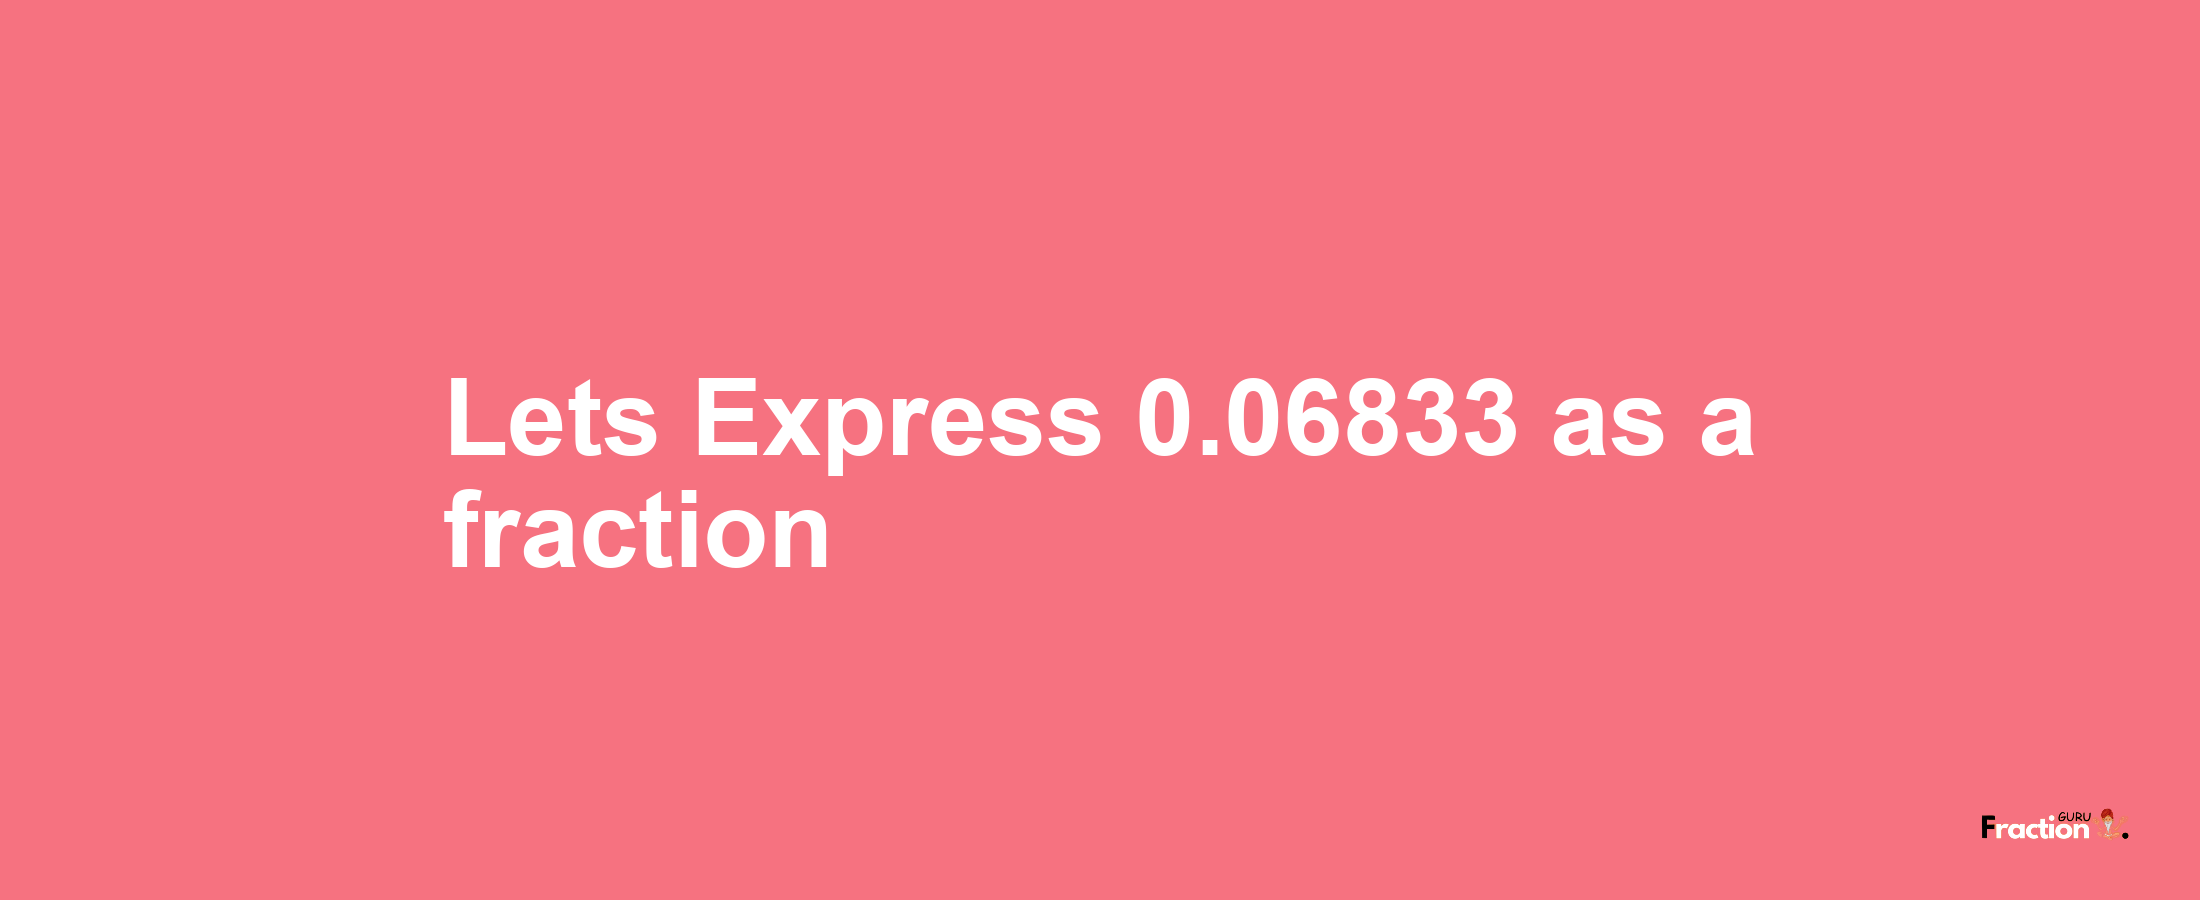 Lets Express 0.06833 as afraction